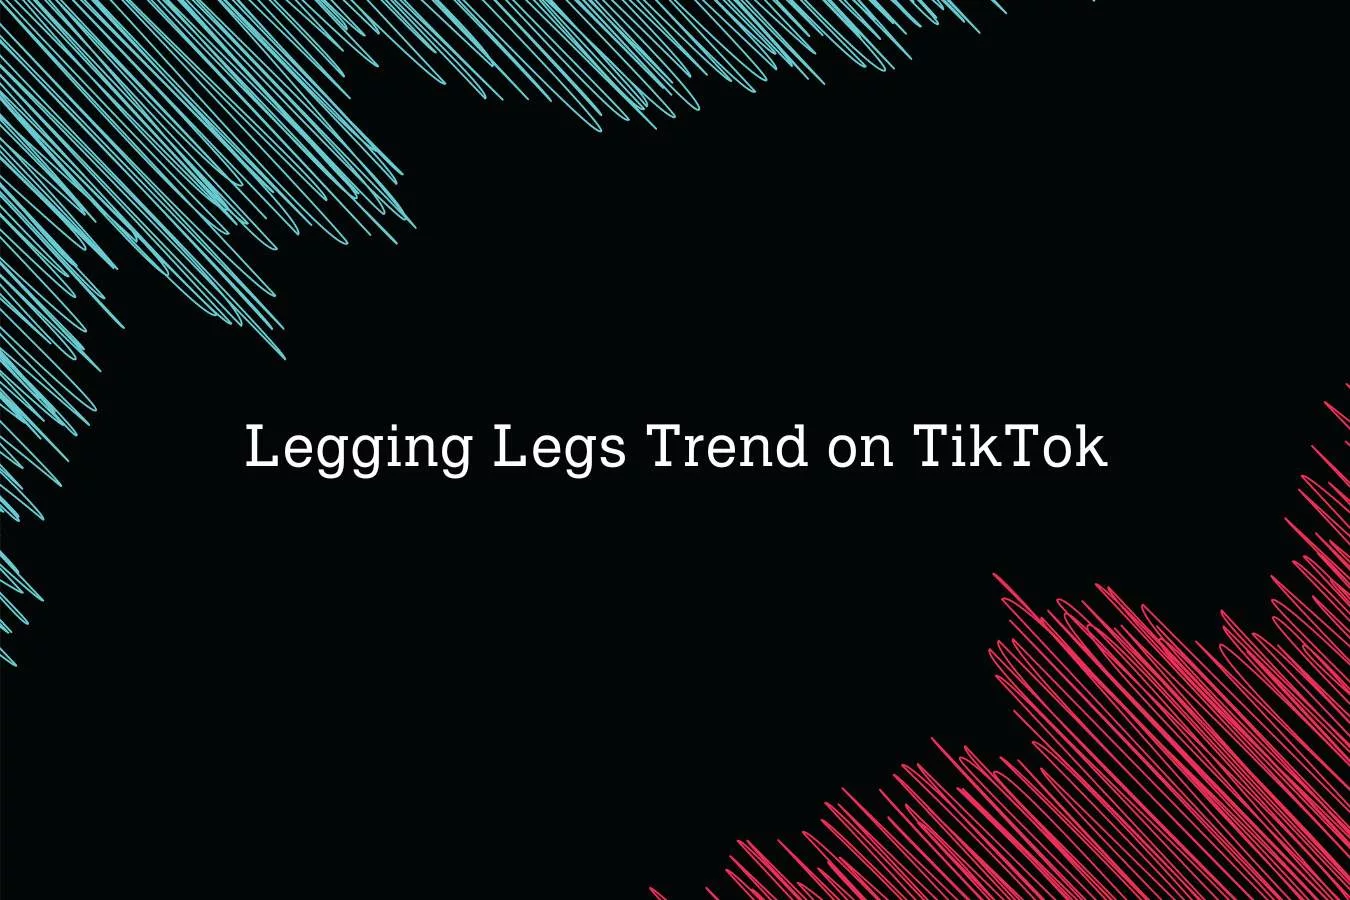 Legging Legs Trends on TikTok Controversy: Dangers of Thigh-Gap Obsession Explained